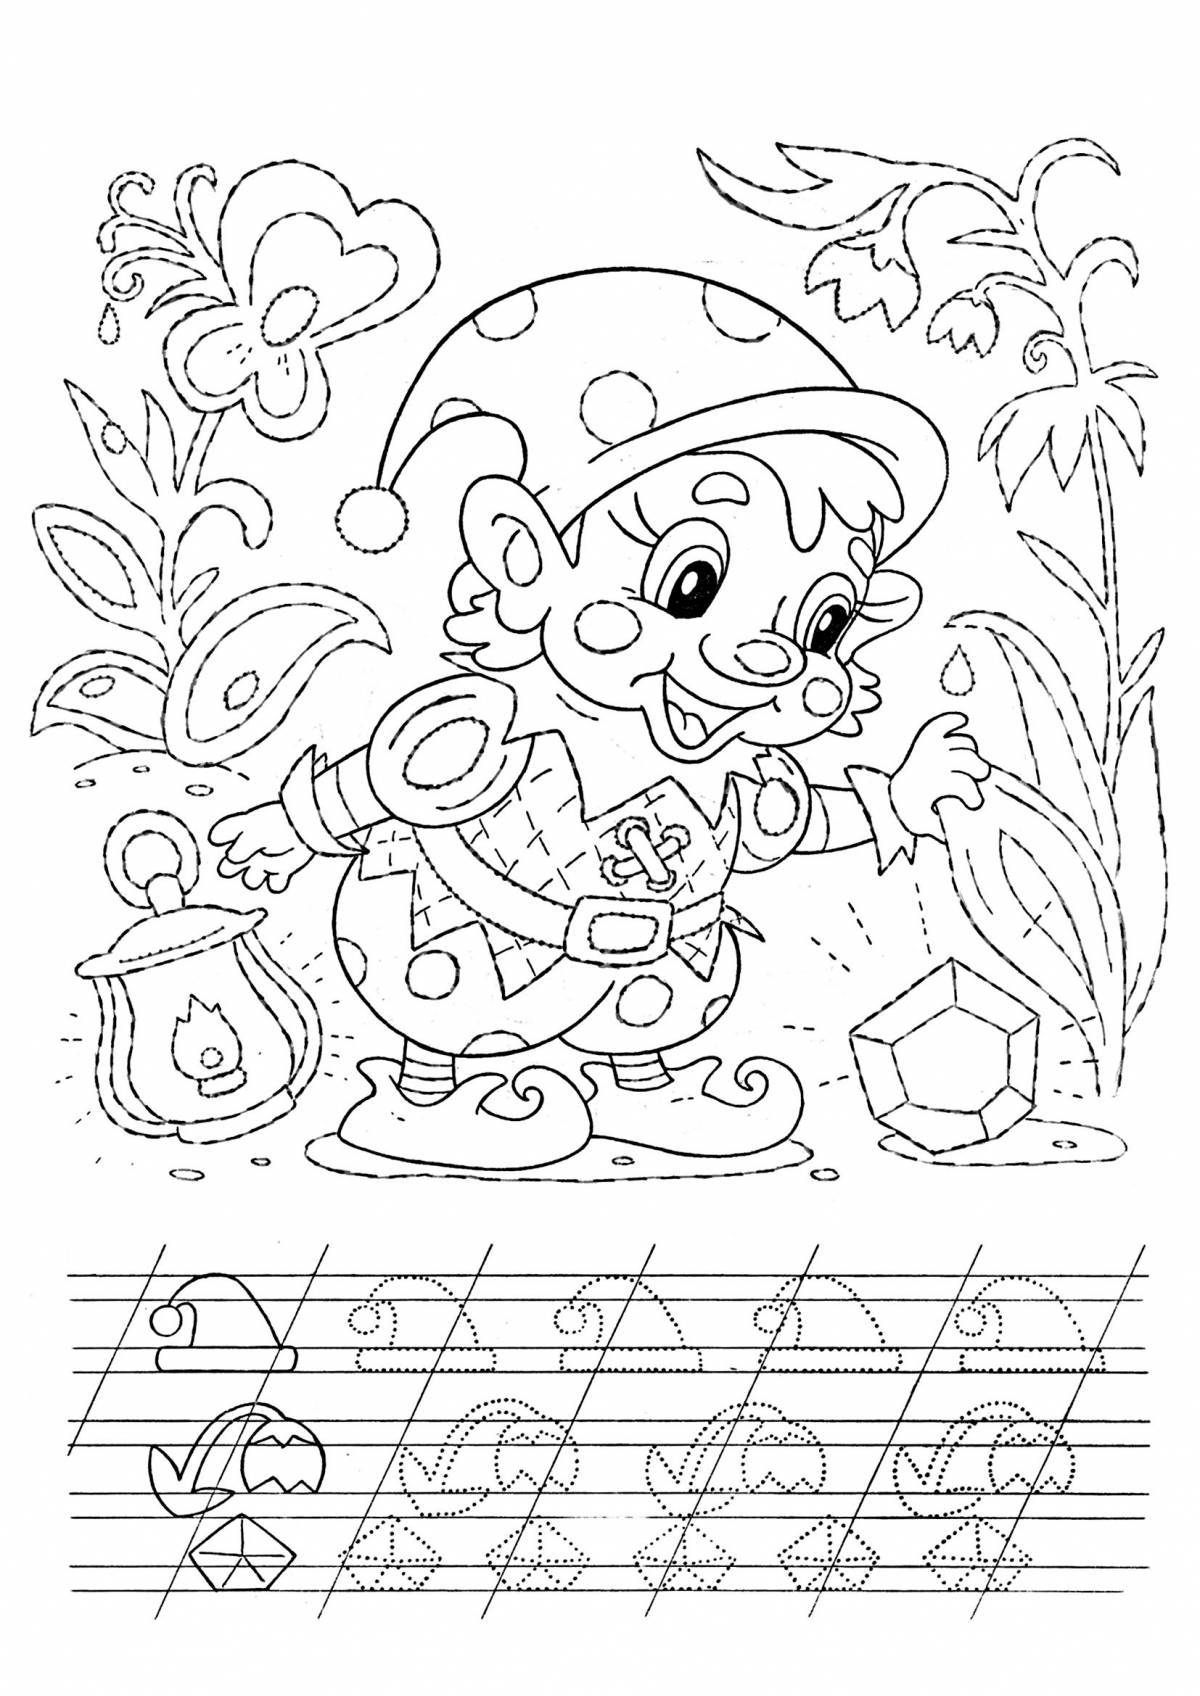 Colorful recipe coloring page for 6-7 year olds